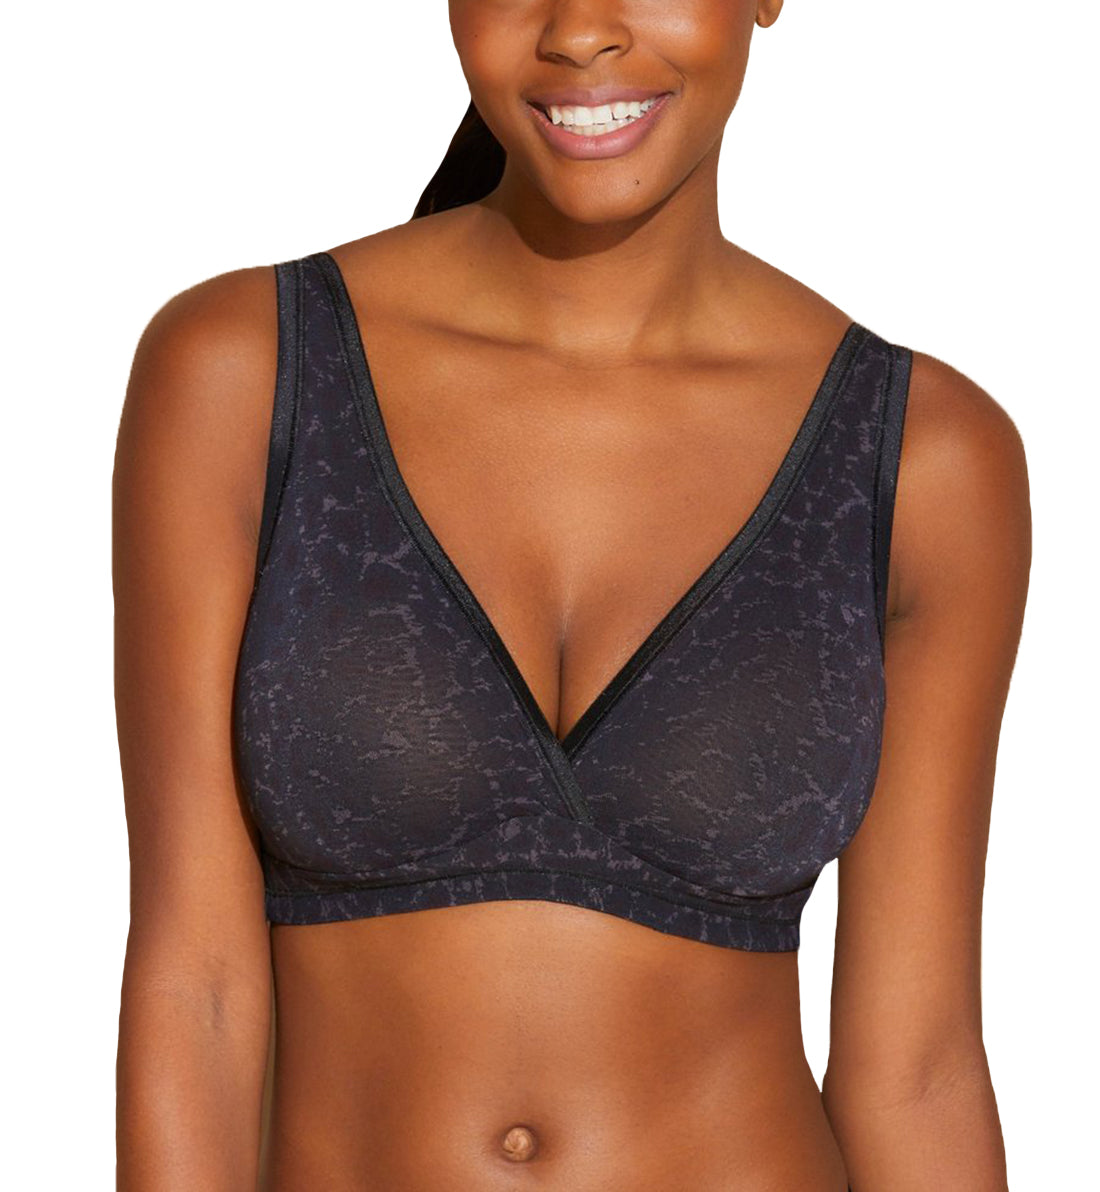 Cosabella Soire Confidence Print CURVY Bralette (SOICP1310),XS,Black Panther - Black Panther,XS